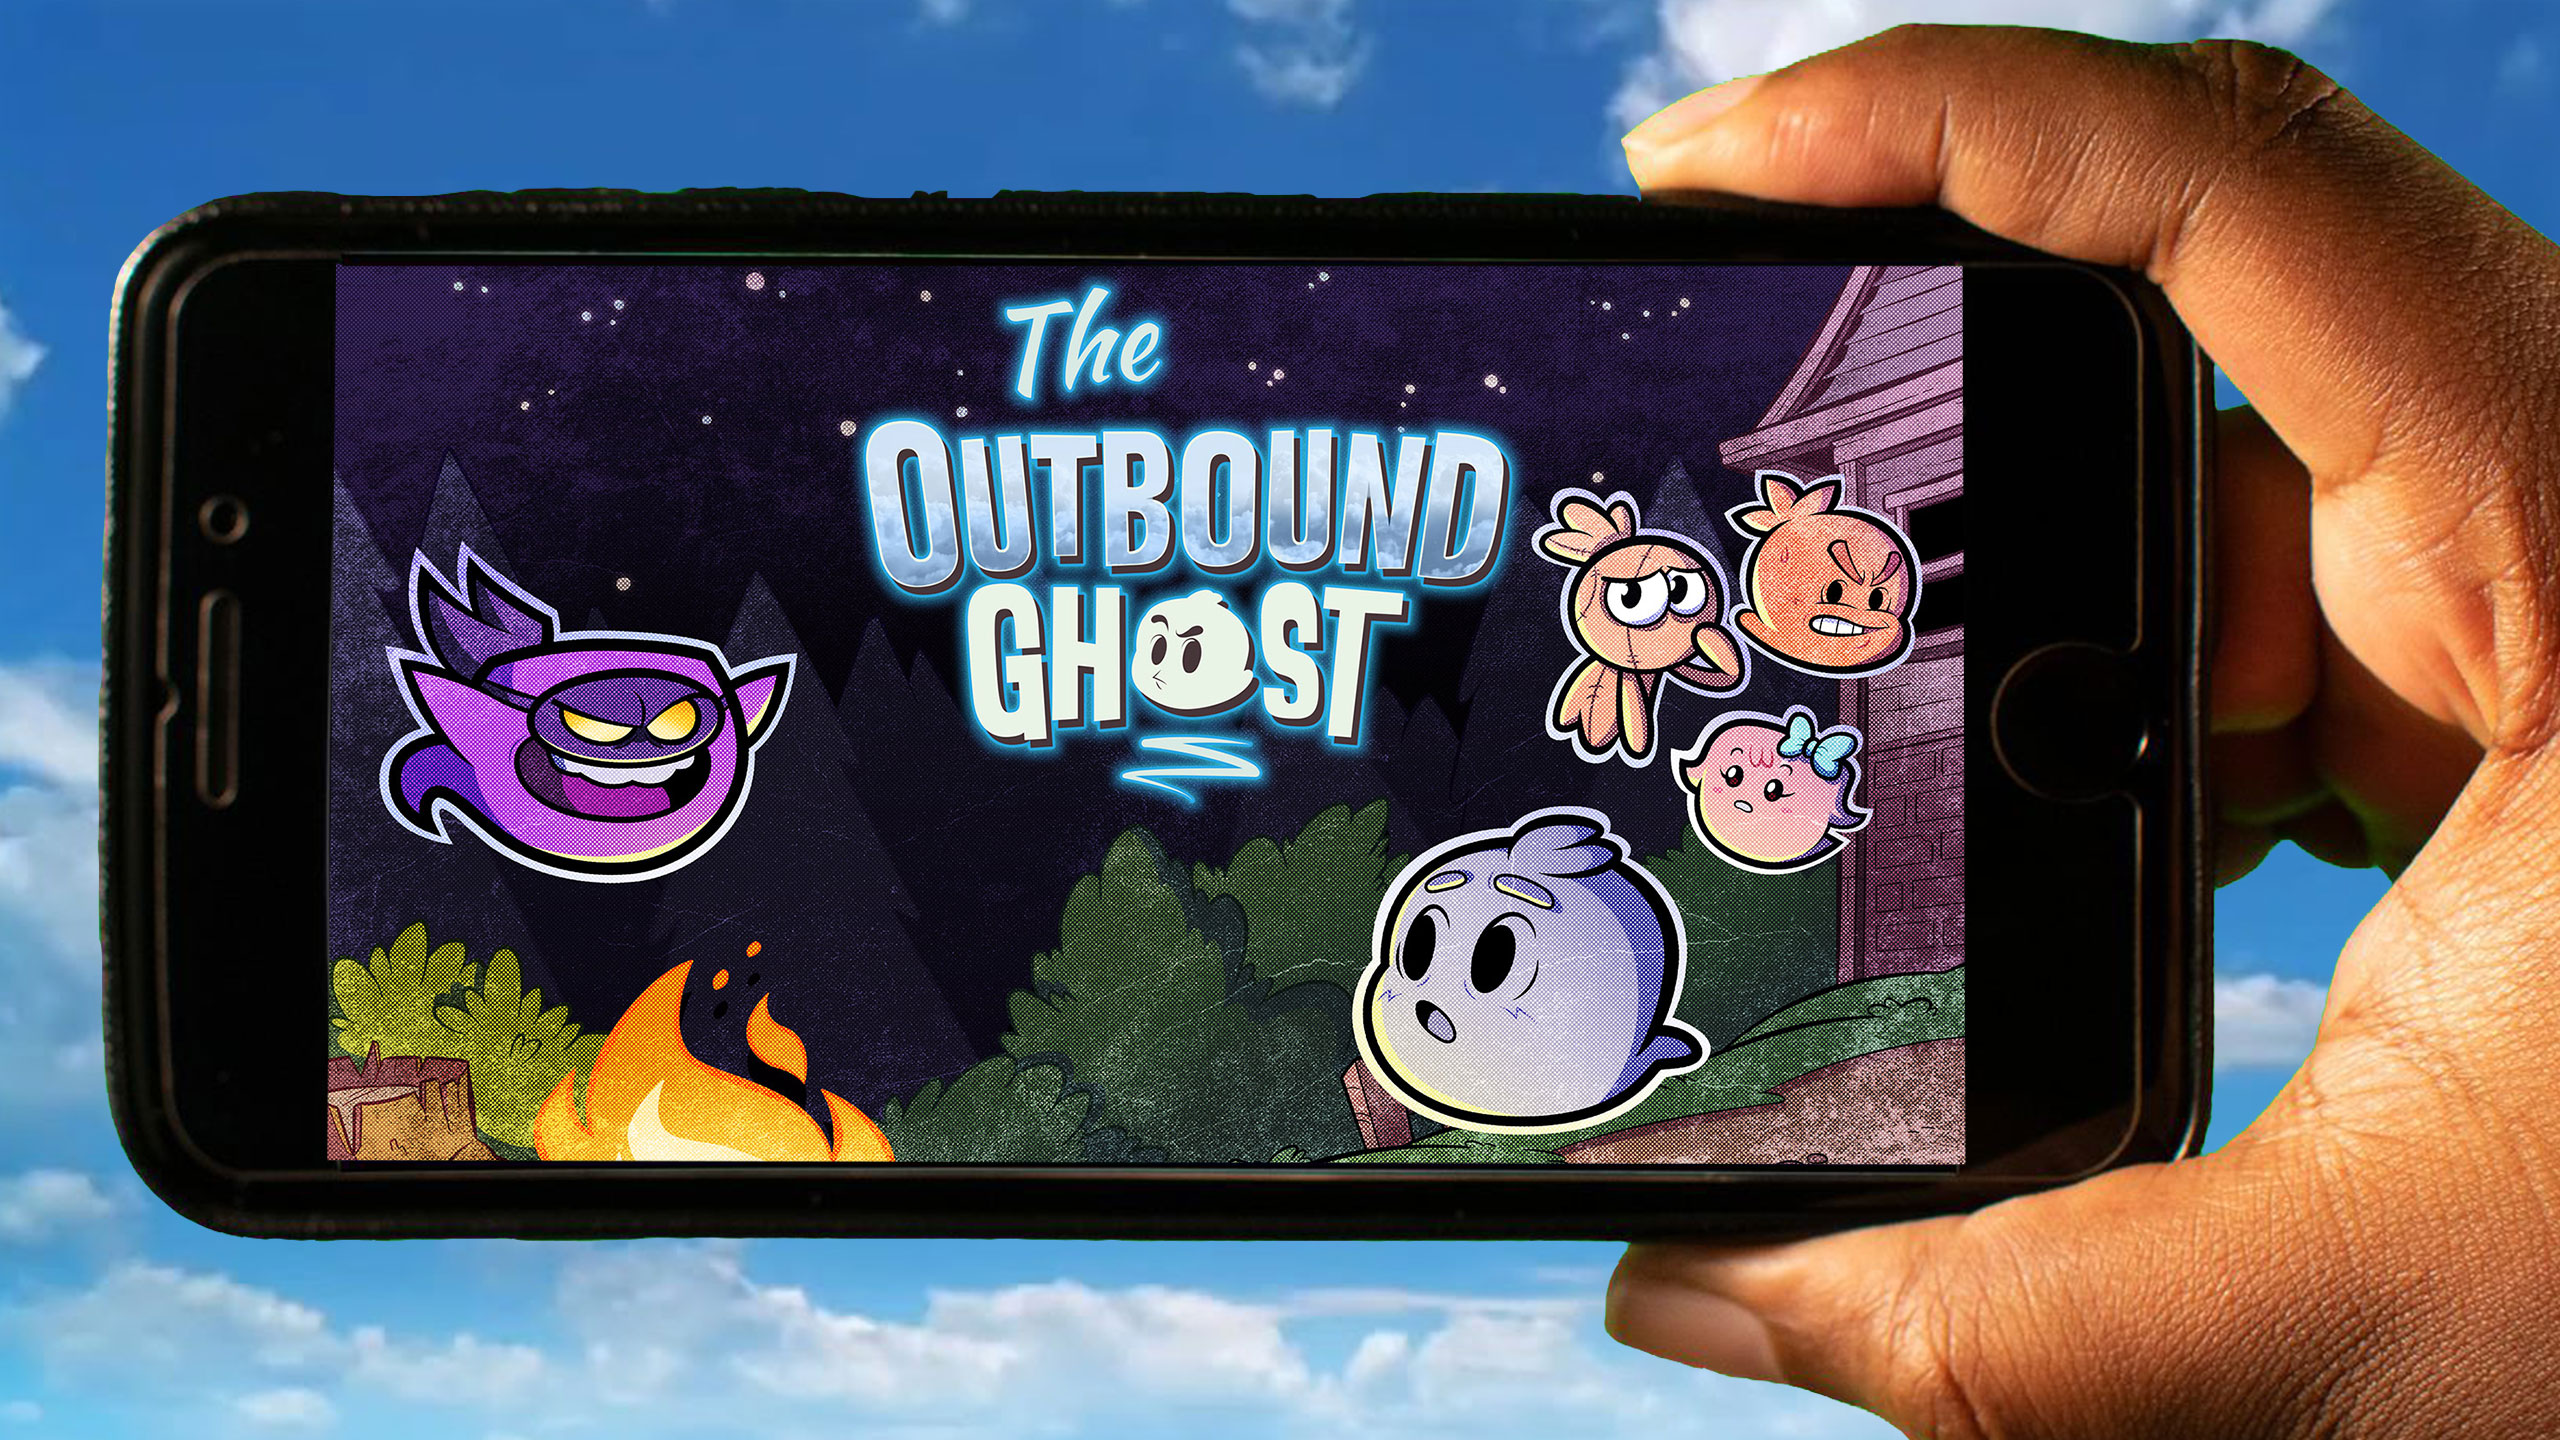 The Outbound Ghost download the new version